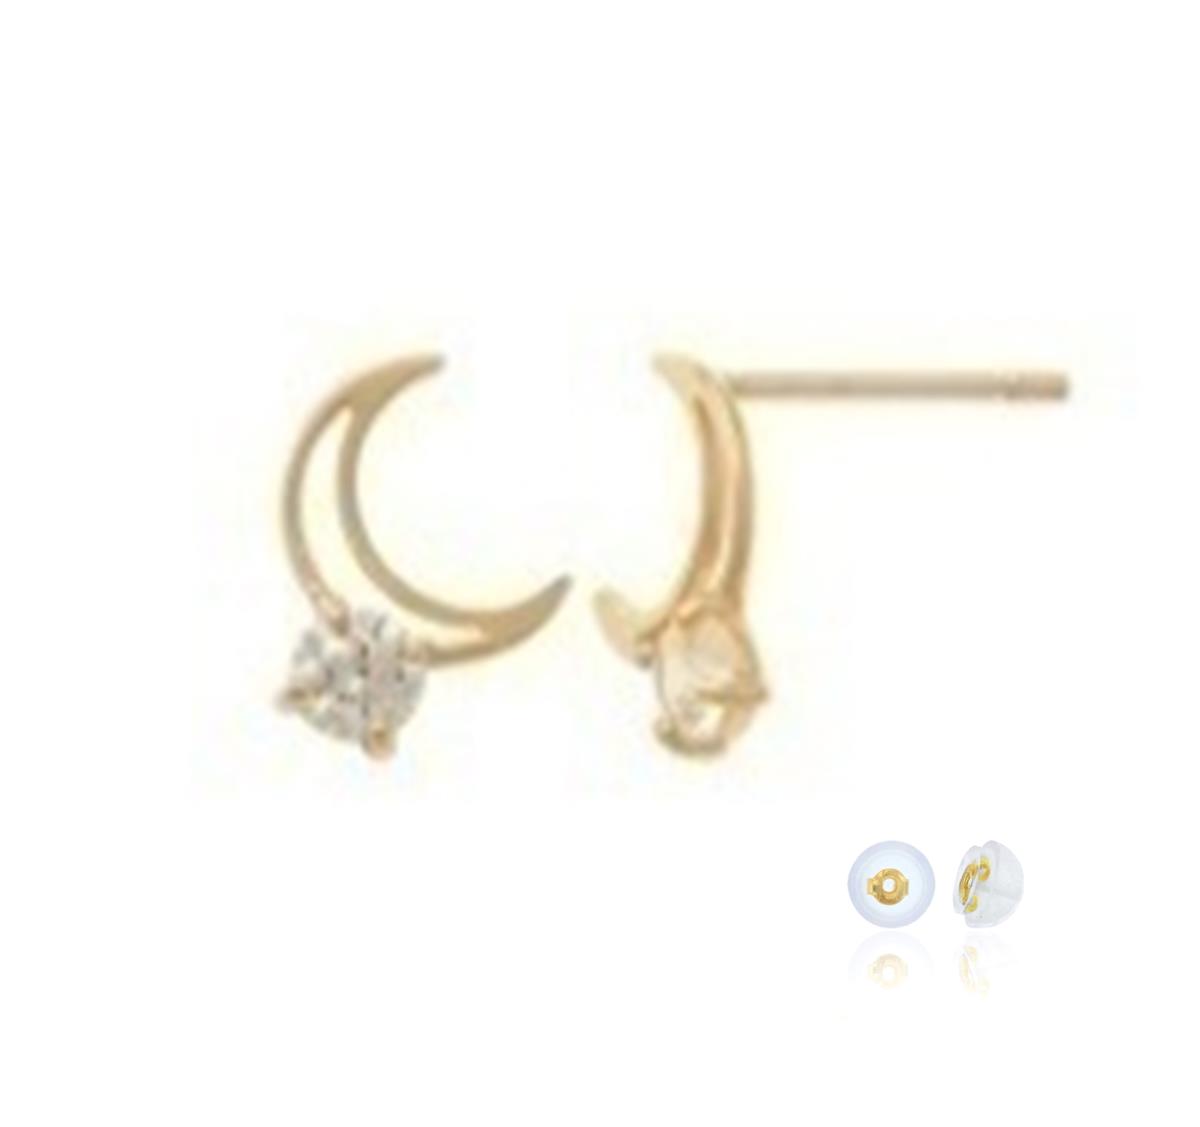 10K Yellow Gold Moon Solitare White CZ 7.5x7mm Stud Earring